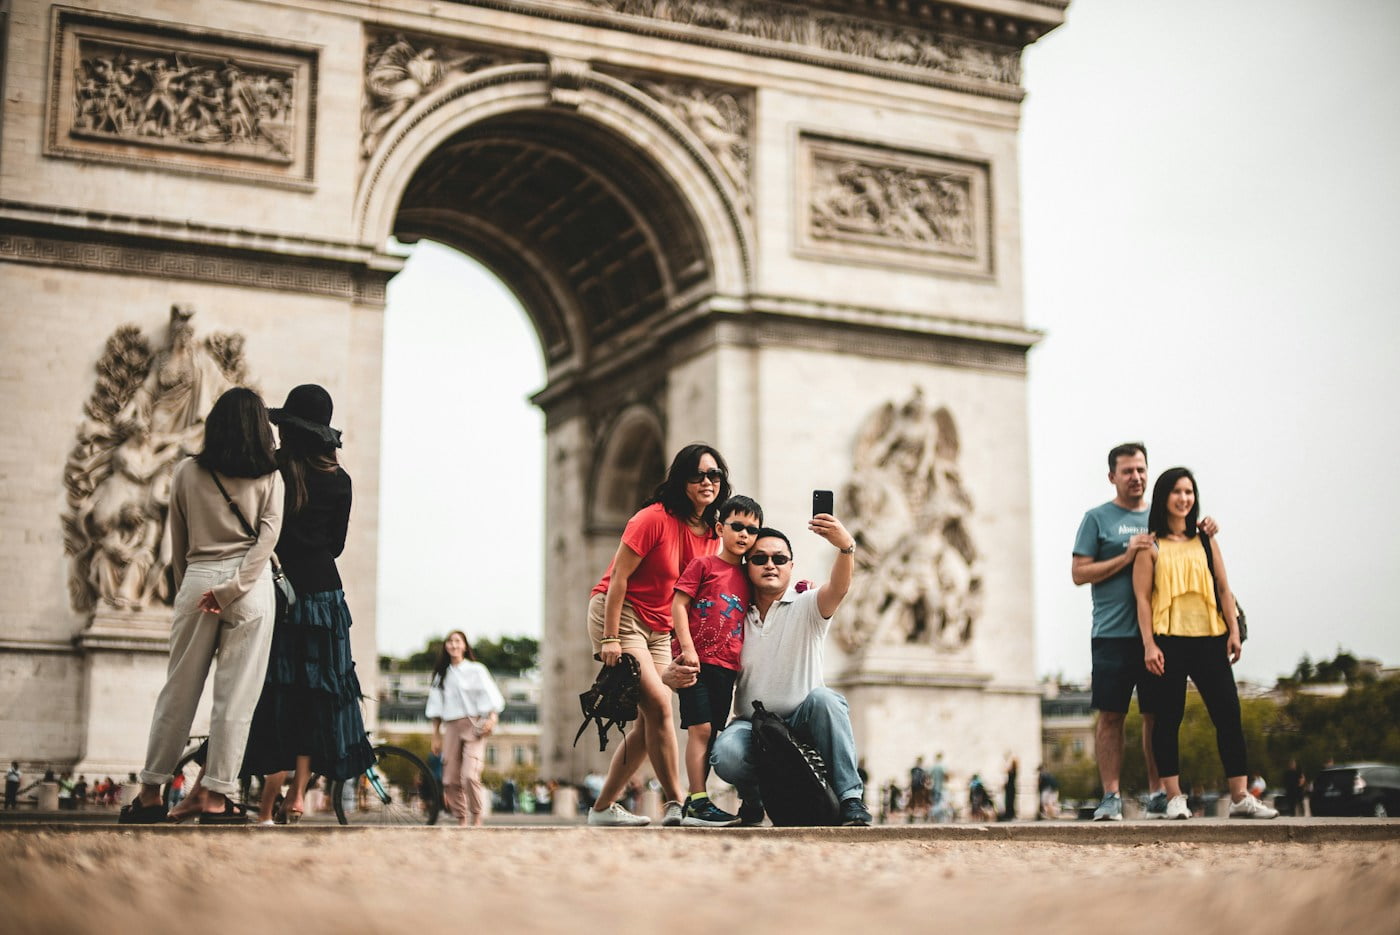 A family taking pictures in front of the arc de triomphe.